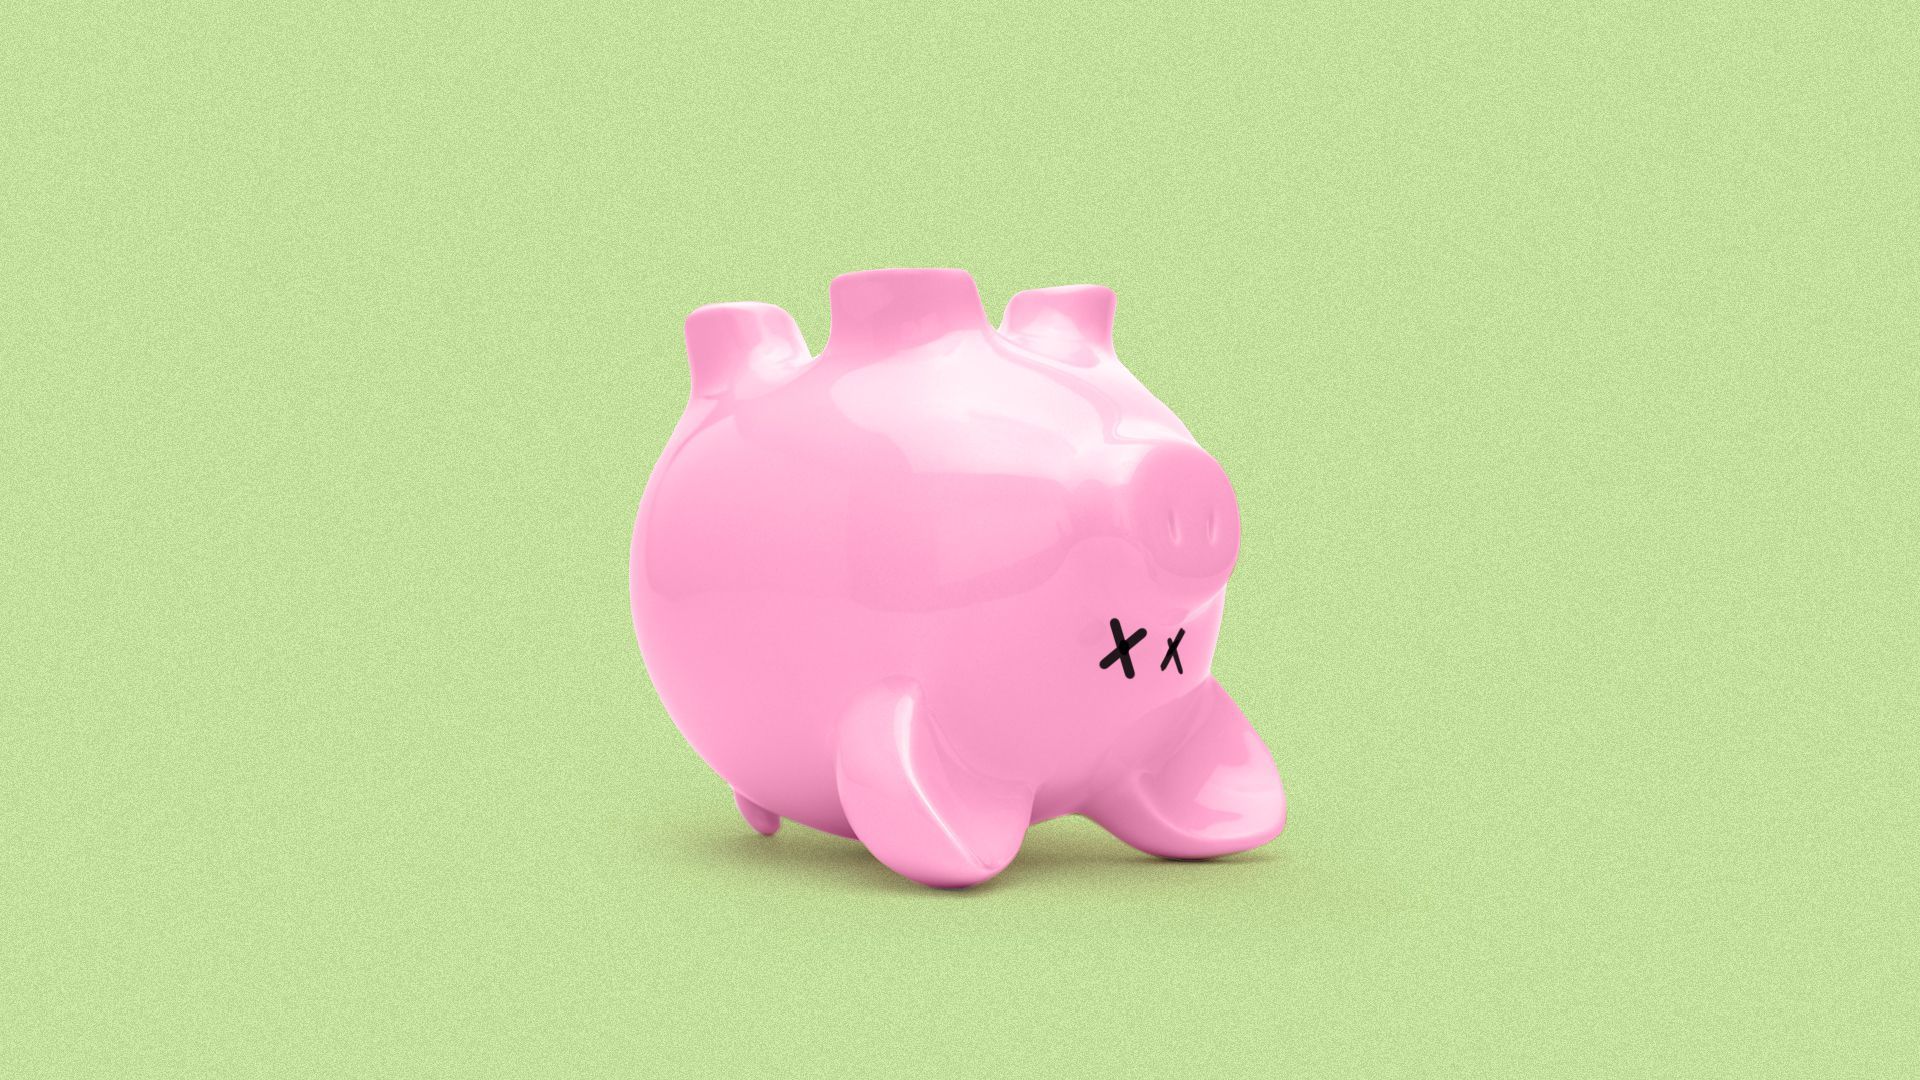 Illustration of upside down piggy bank with x's for eyes.